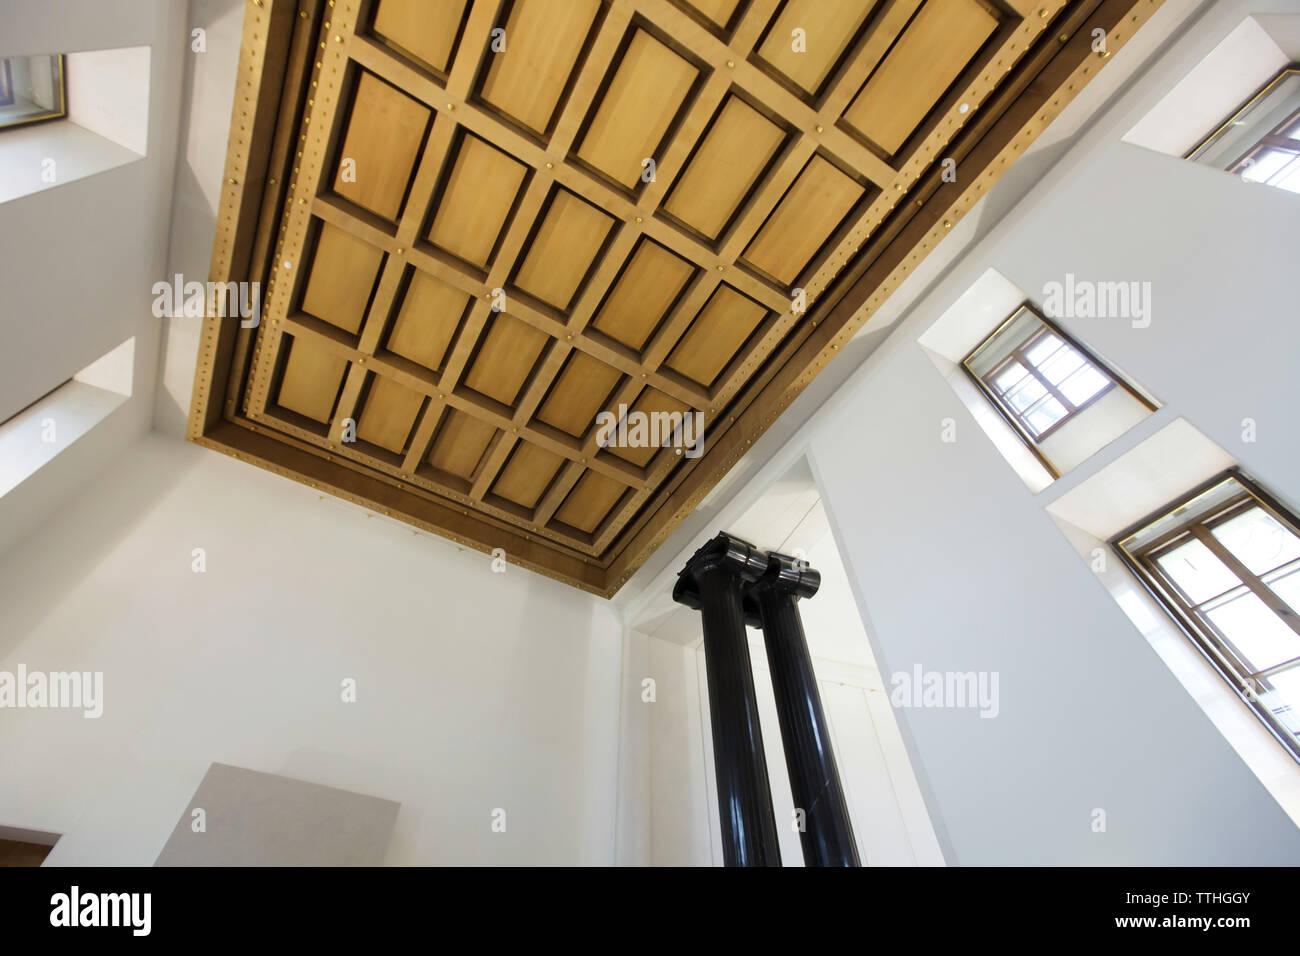 Wooden Coffered Ceiling Designed By Slovenian Modernist